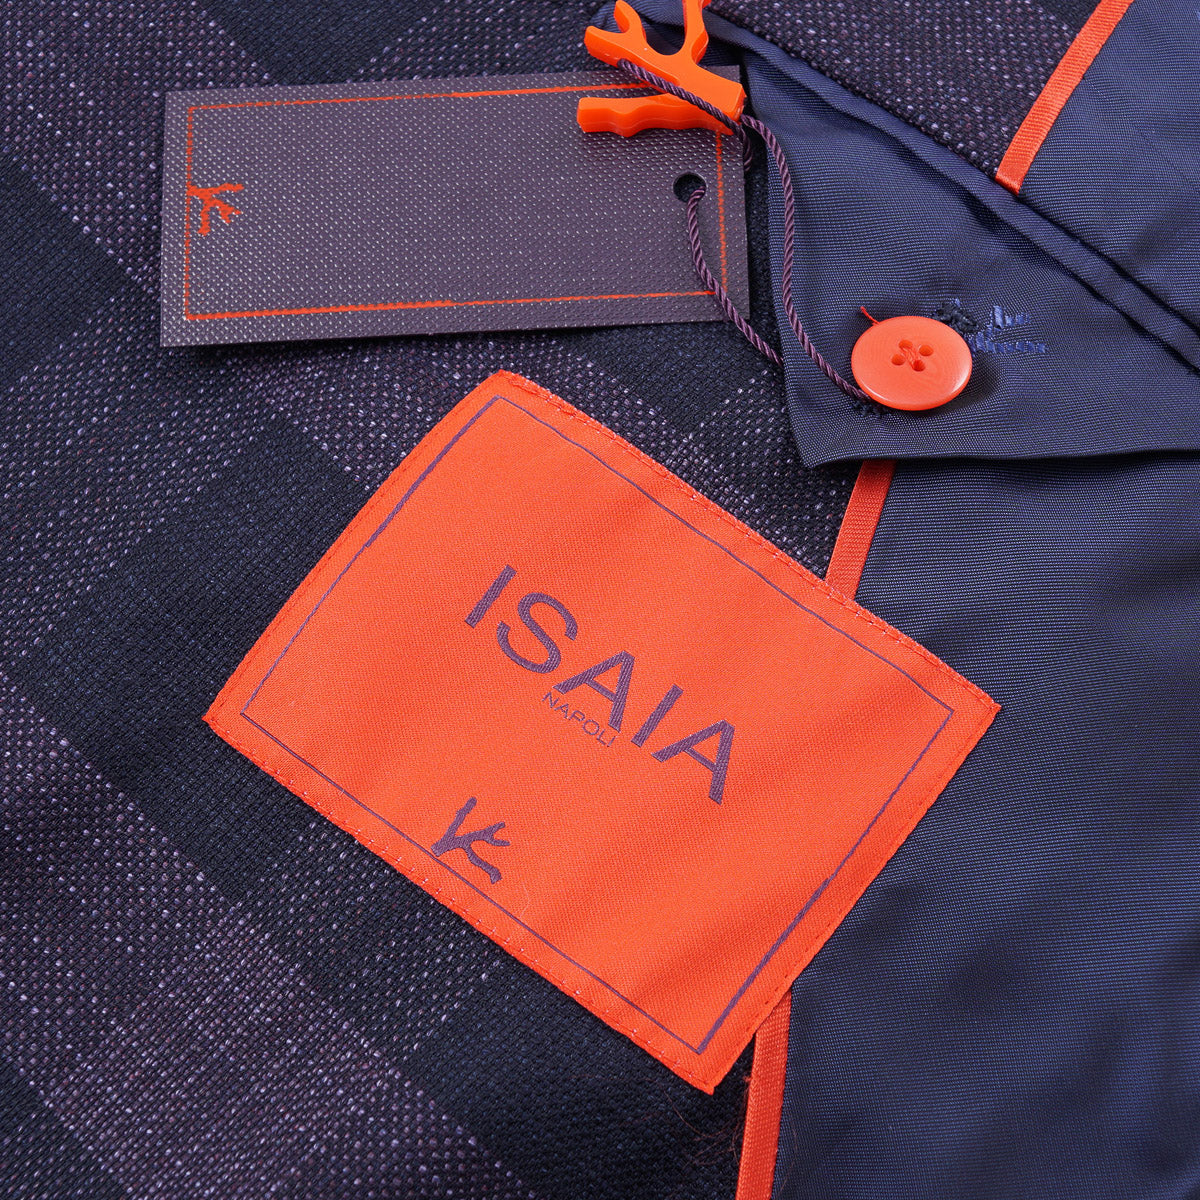 Isaia Woven Wool and Silk Sport Coat - Top Shelf Apparel